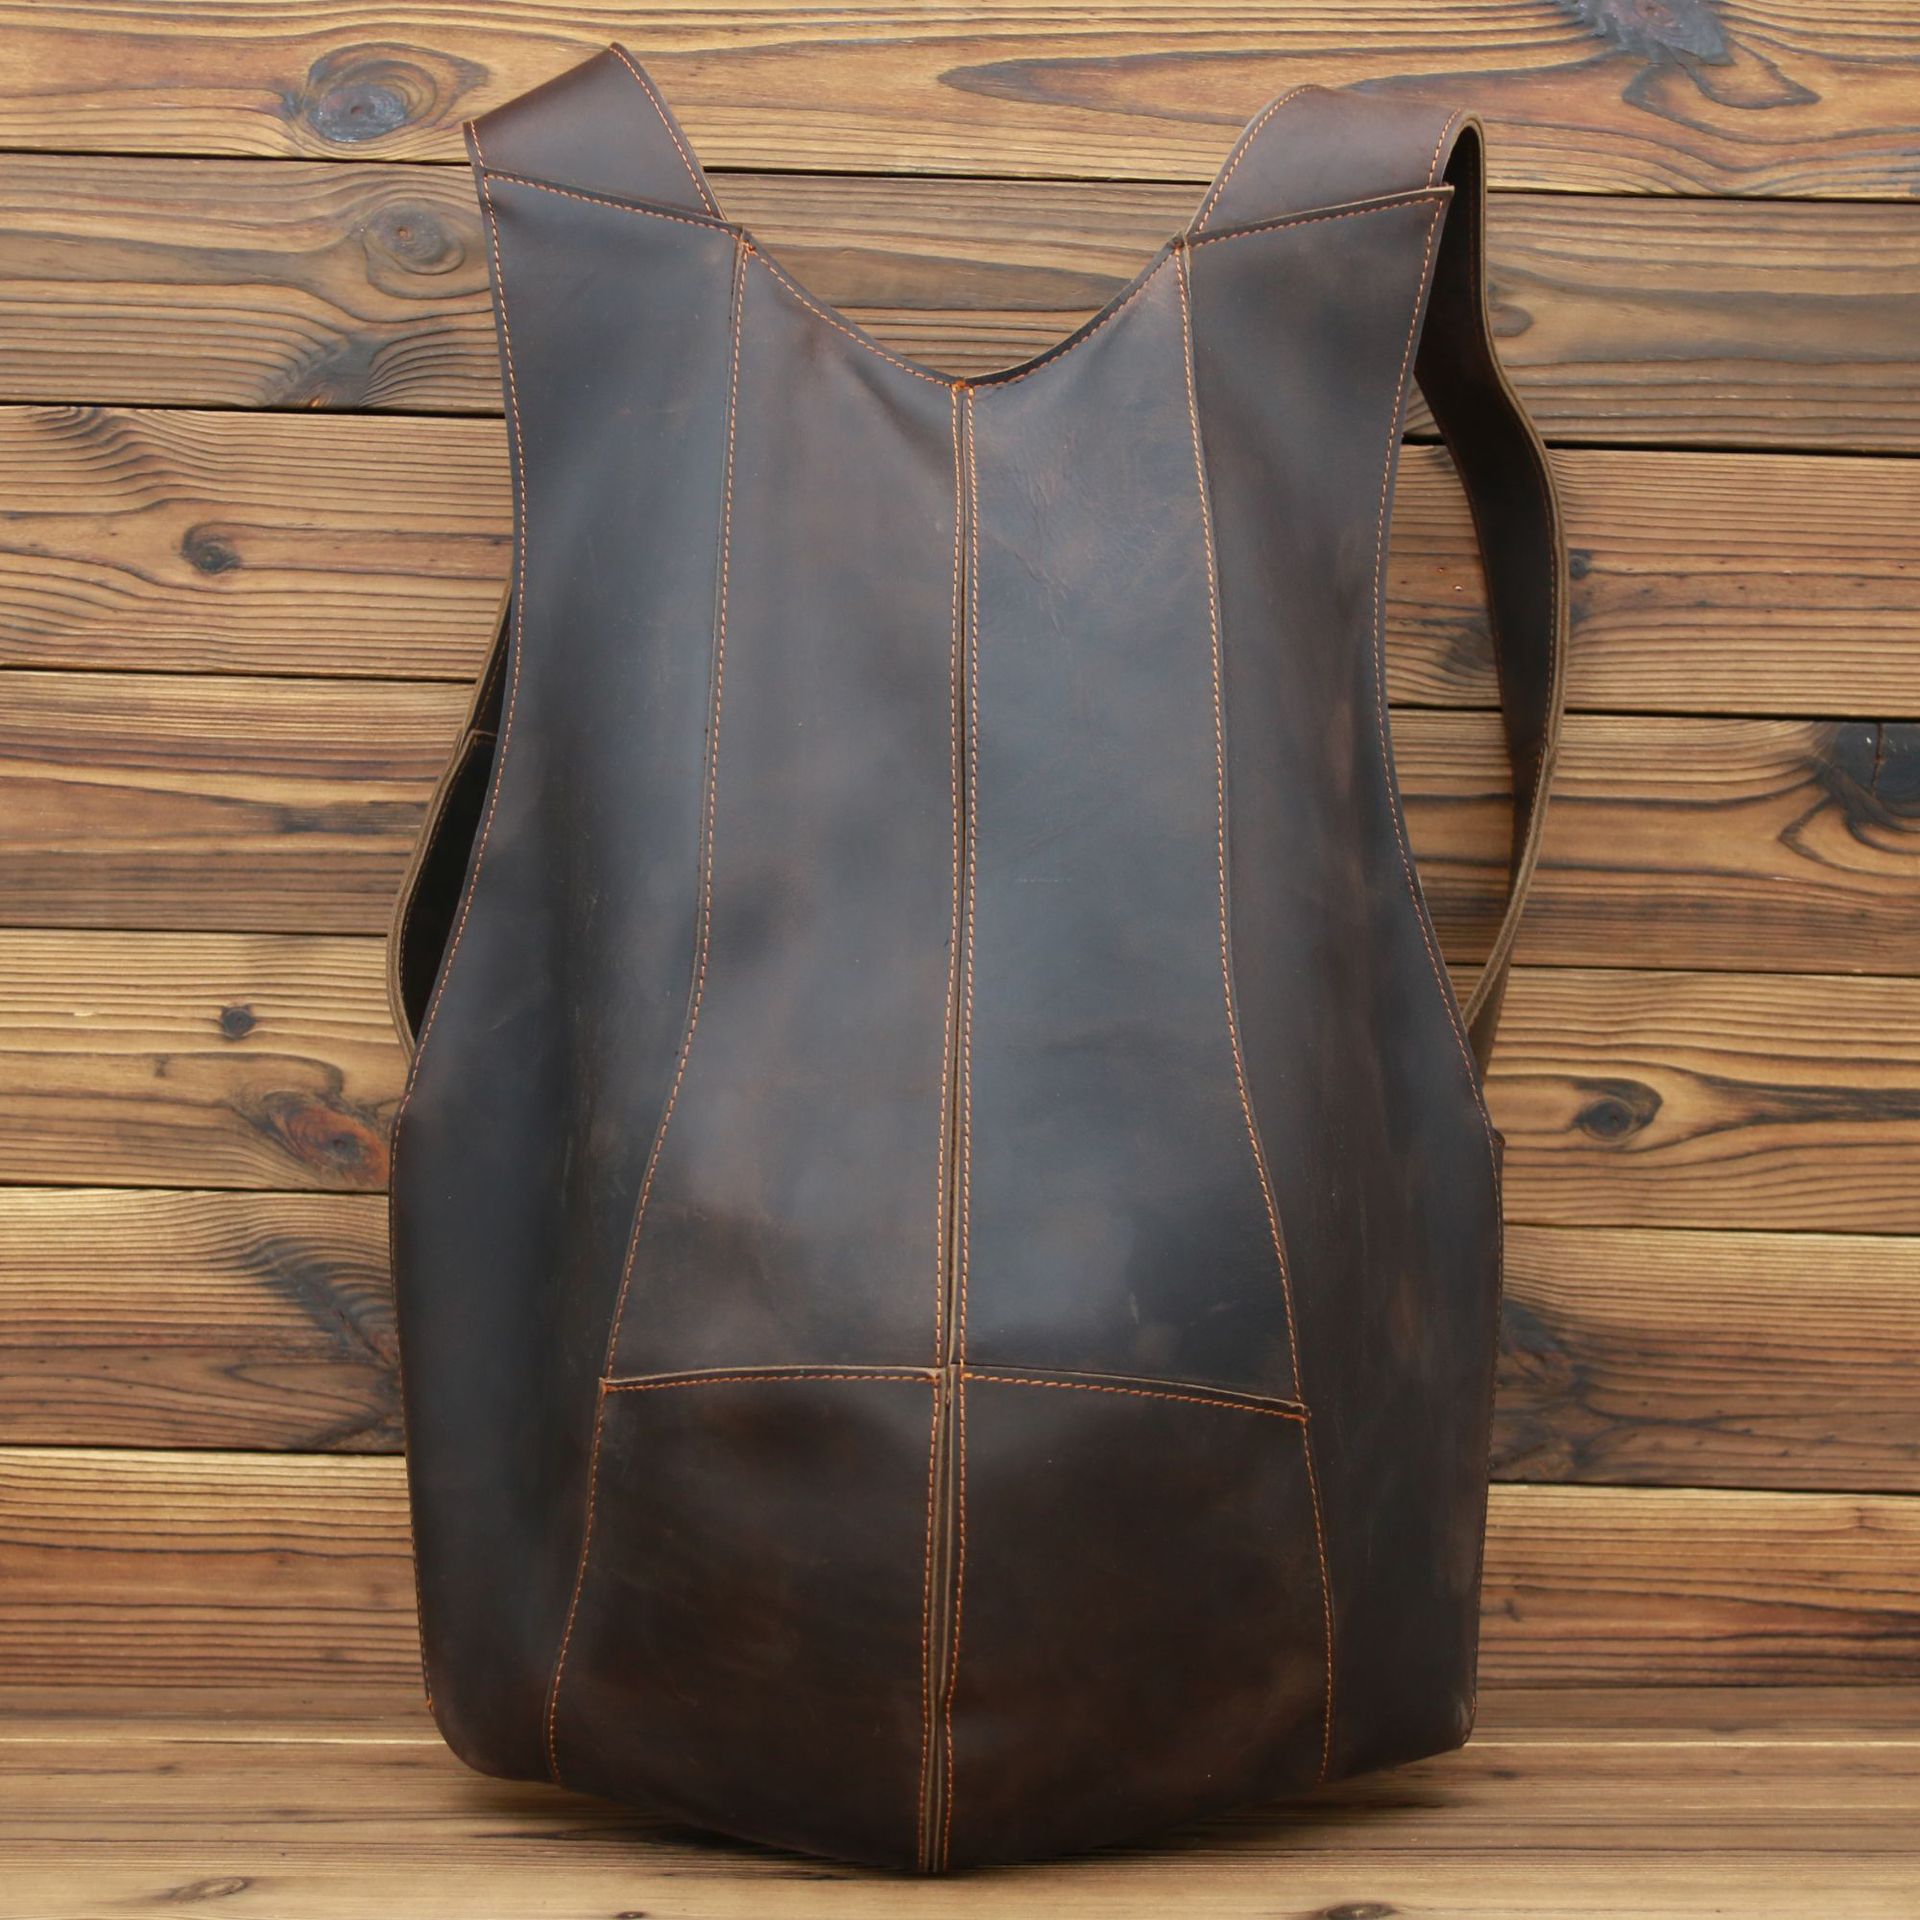 Toyella 2108 Men's Backpack Crazy Horse Leather Backpack Retro Dark Brown College Style Student Backpack Boys Backpack Brown Not adjustable - image 2 of 7